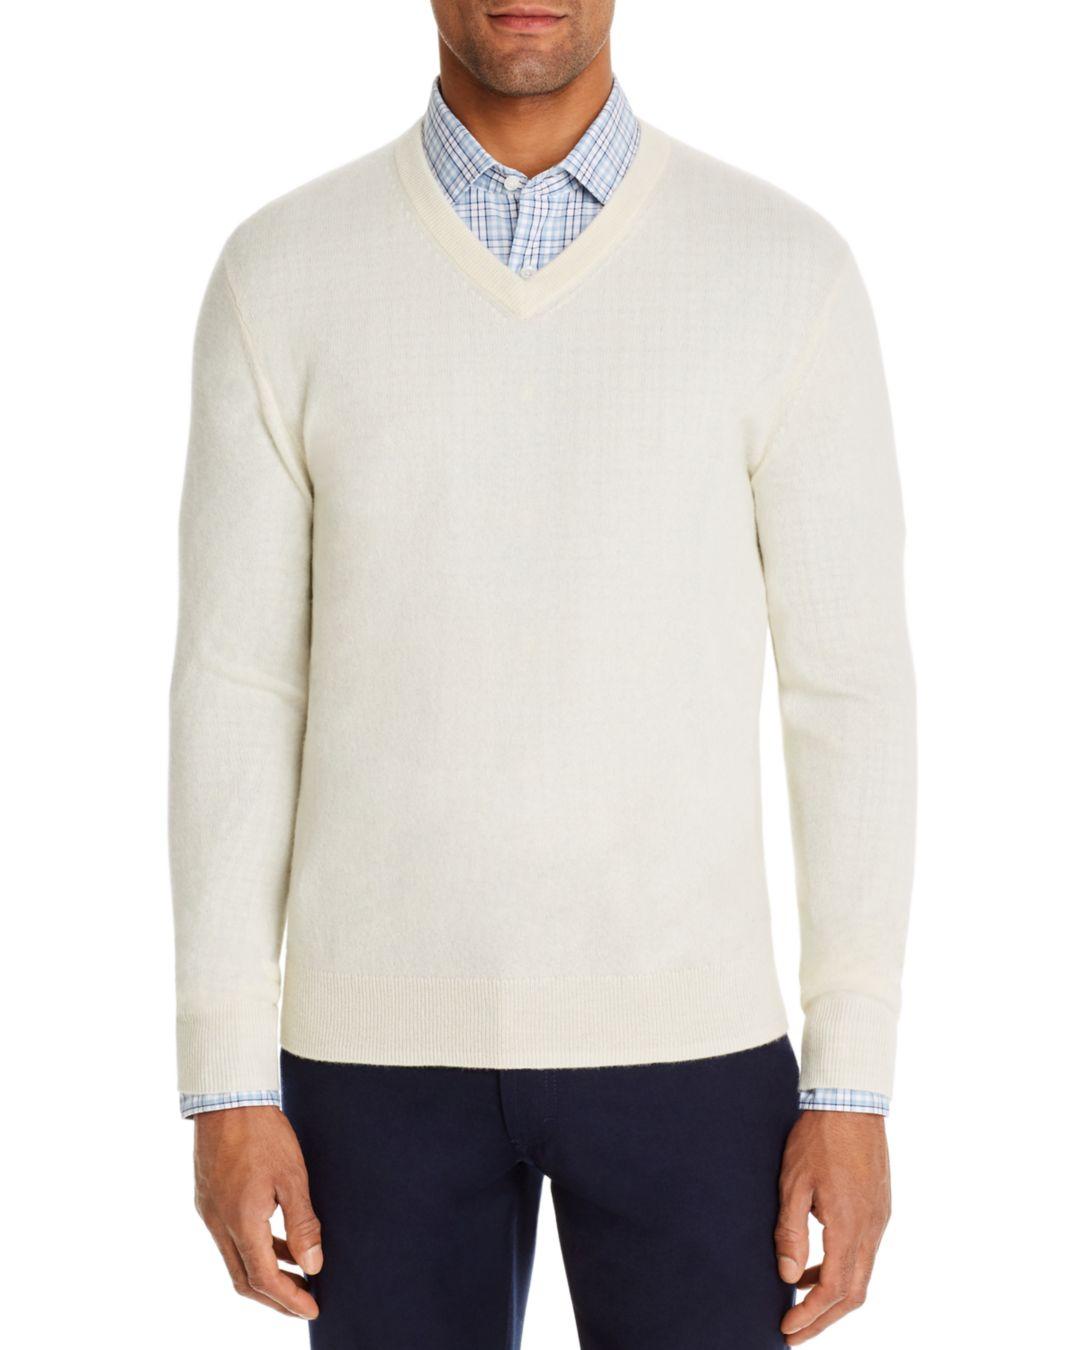 Bloomingdale's Cashmere V - Neck Sweater in Ivory (White) for Men - Lyst